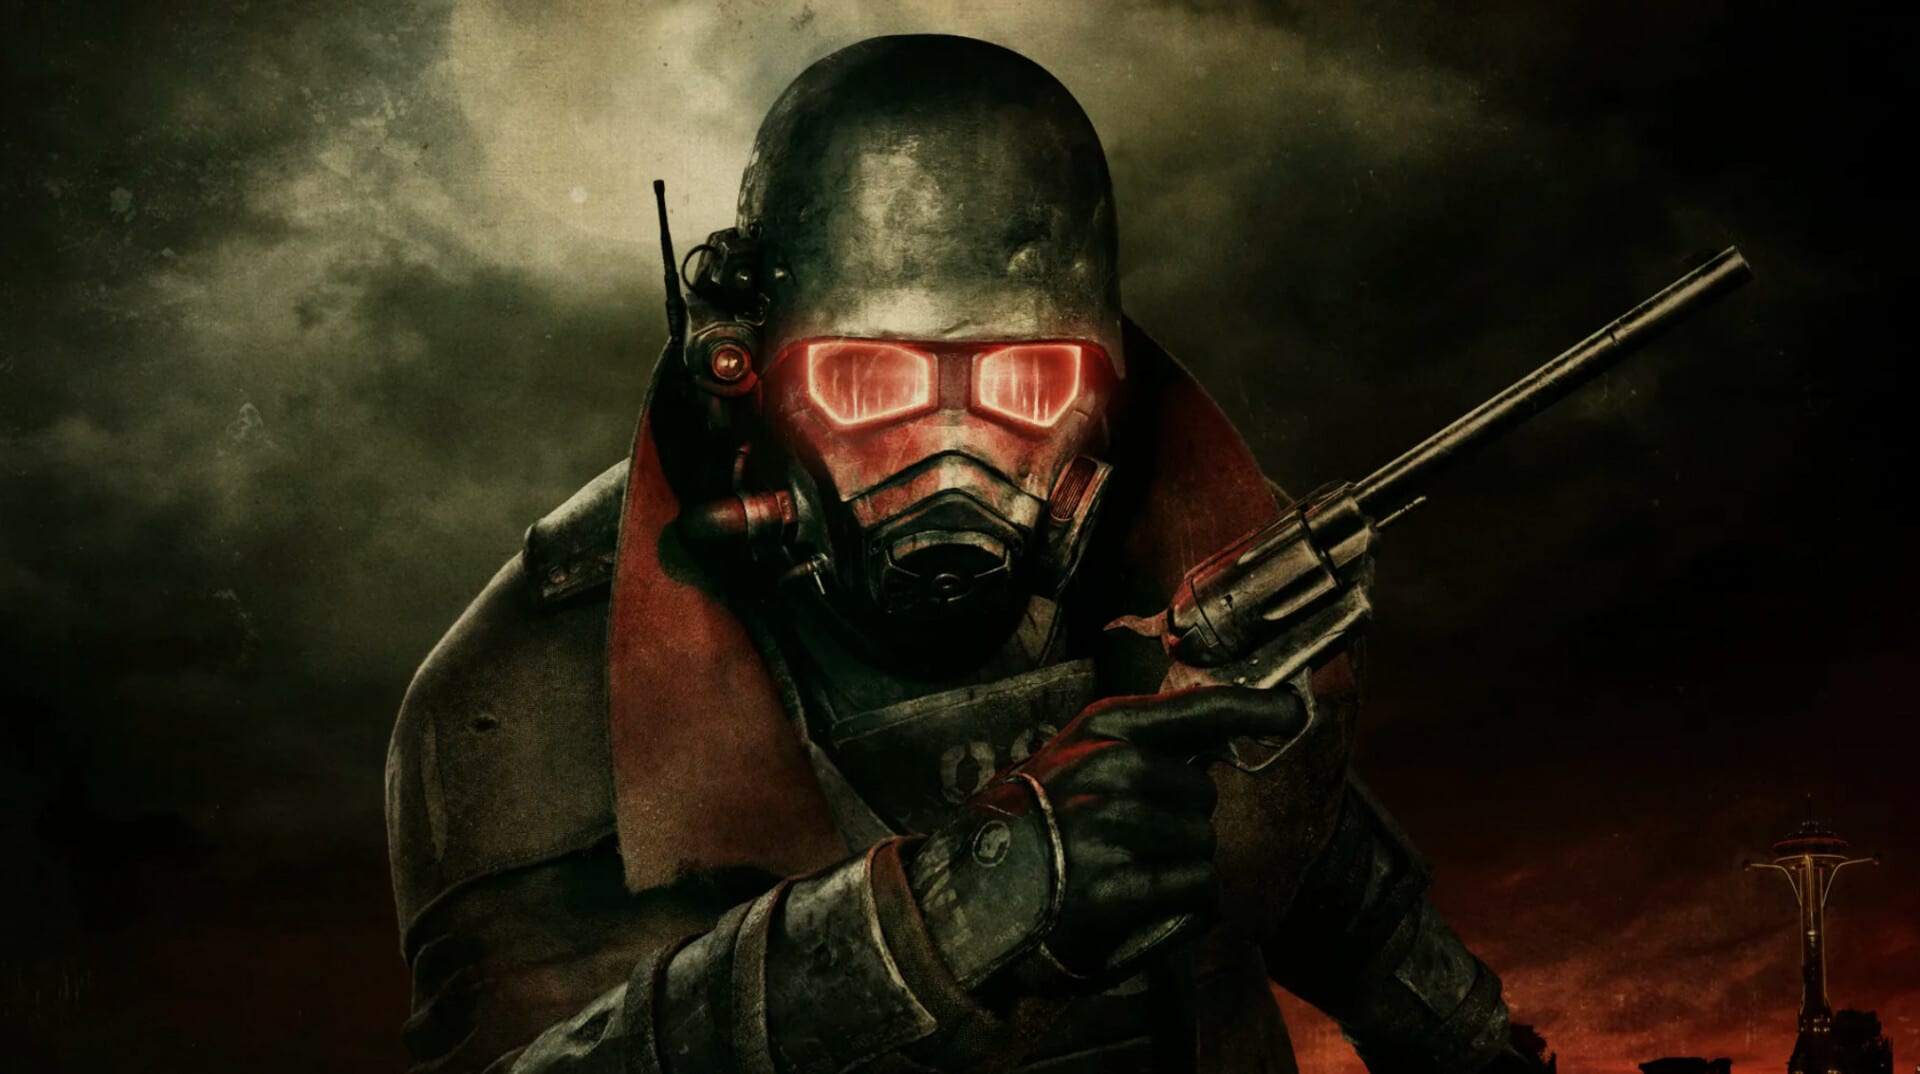 Fallout New Vegas 2 is reportedly in early talks